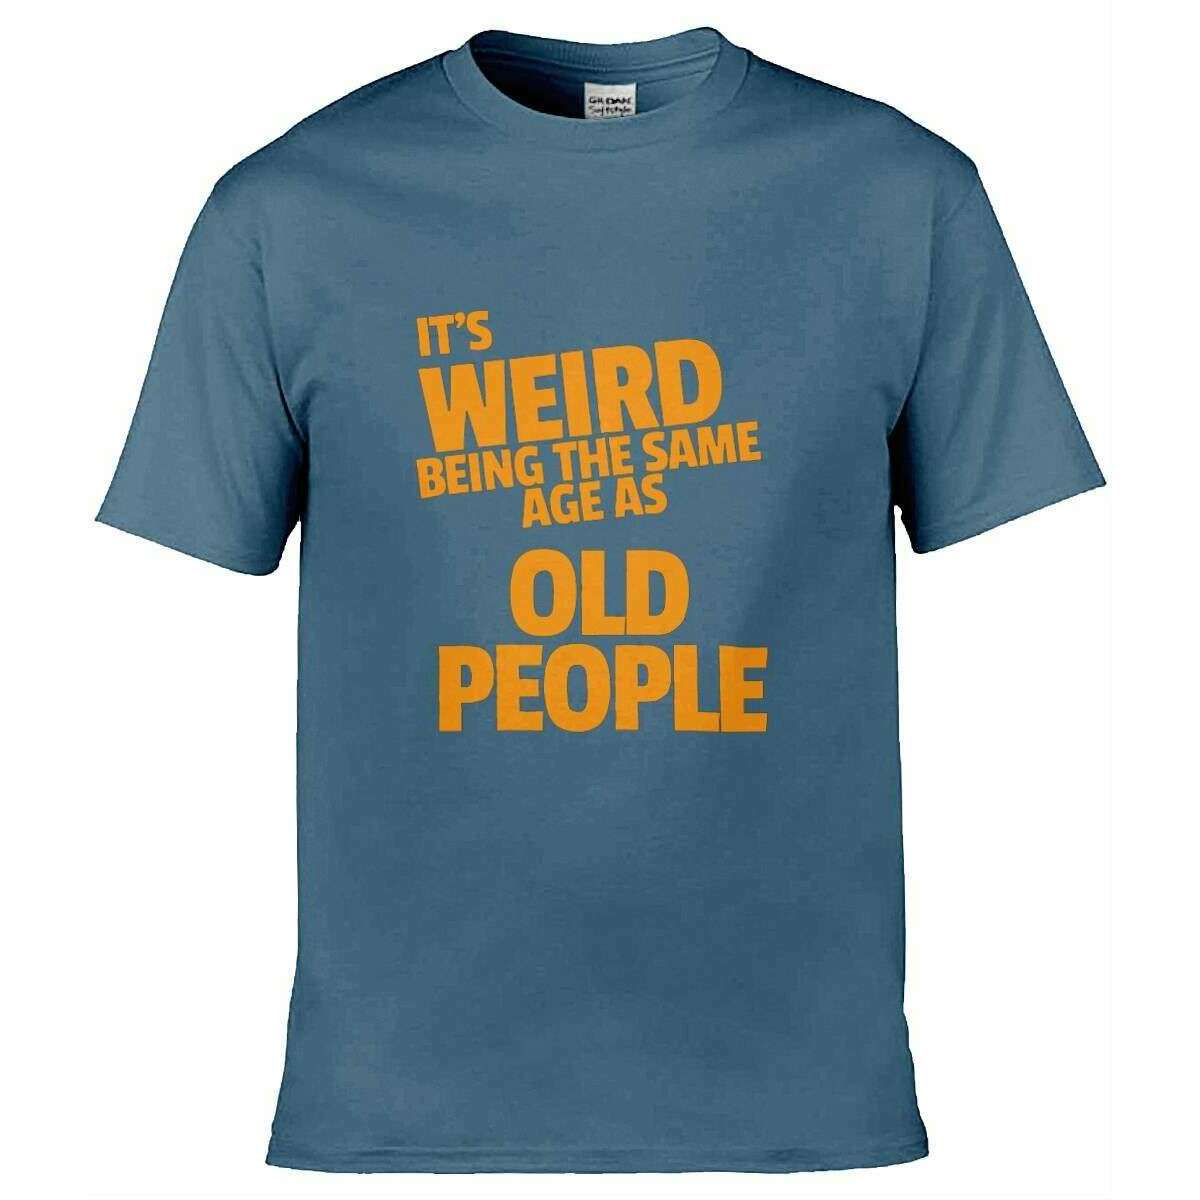 Teemarkable! It’s Weird Being The Same Age As Old People T-Shirt